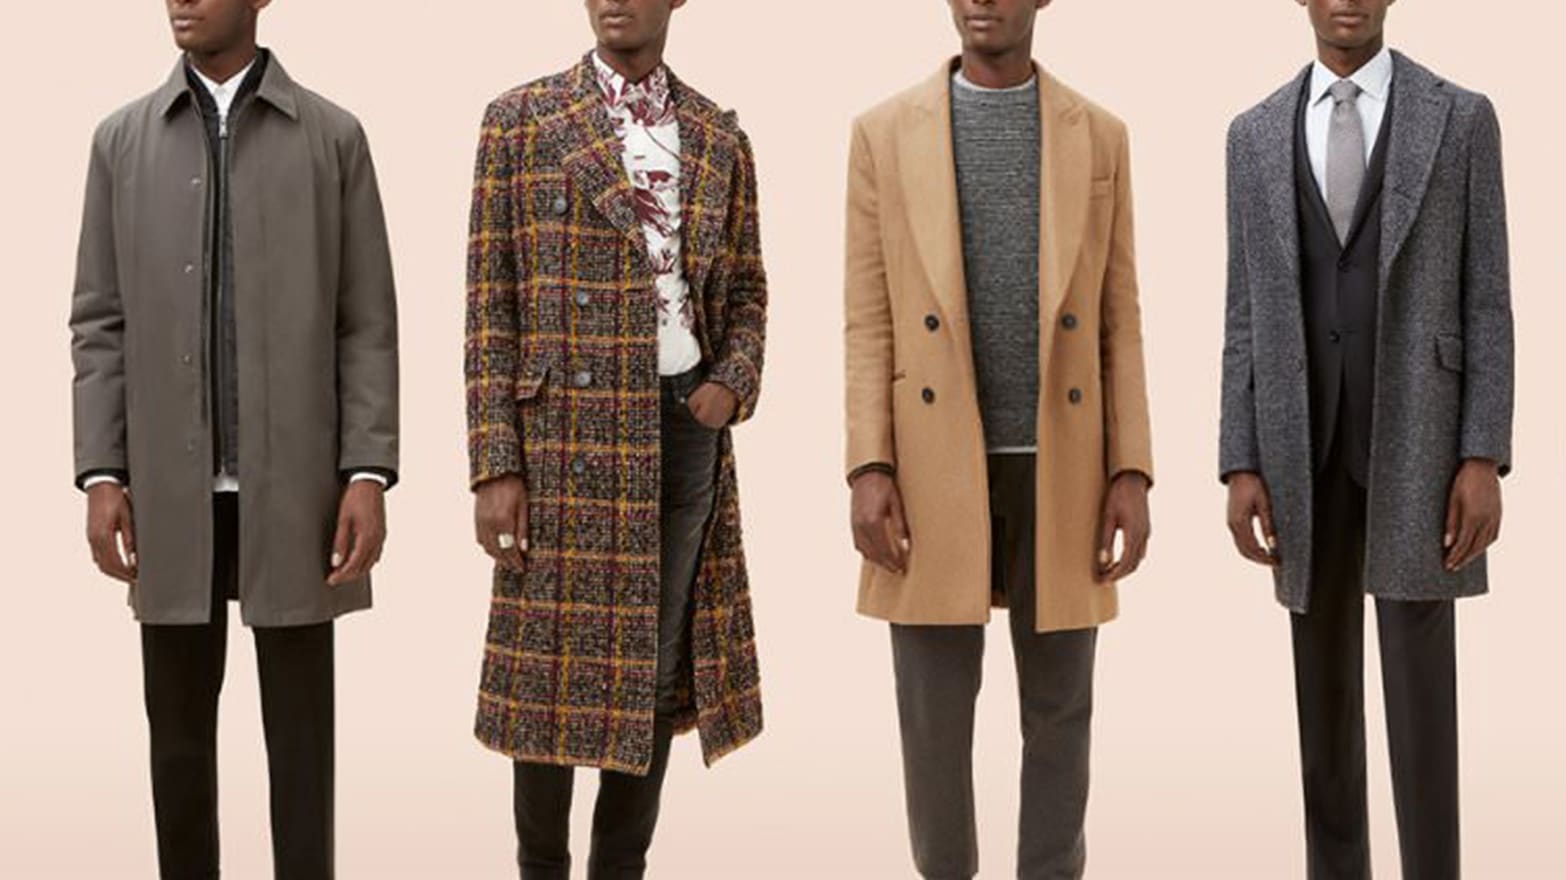 Can Apple TV Sell Men’s Fashion?